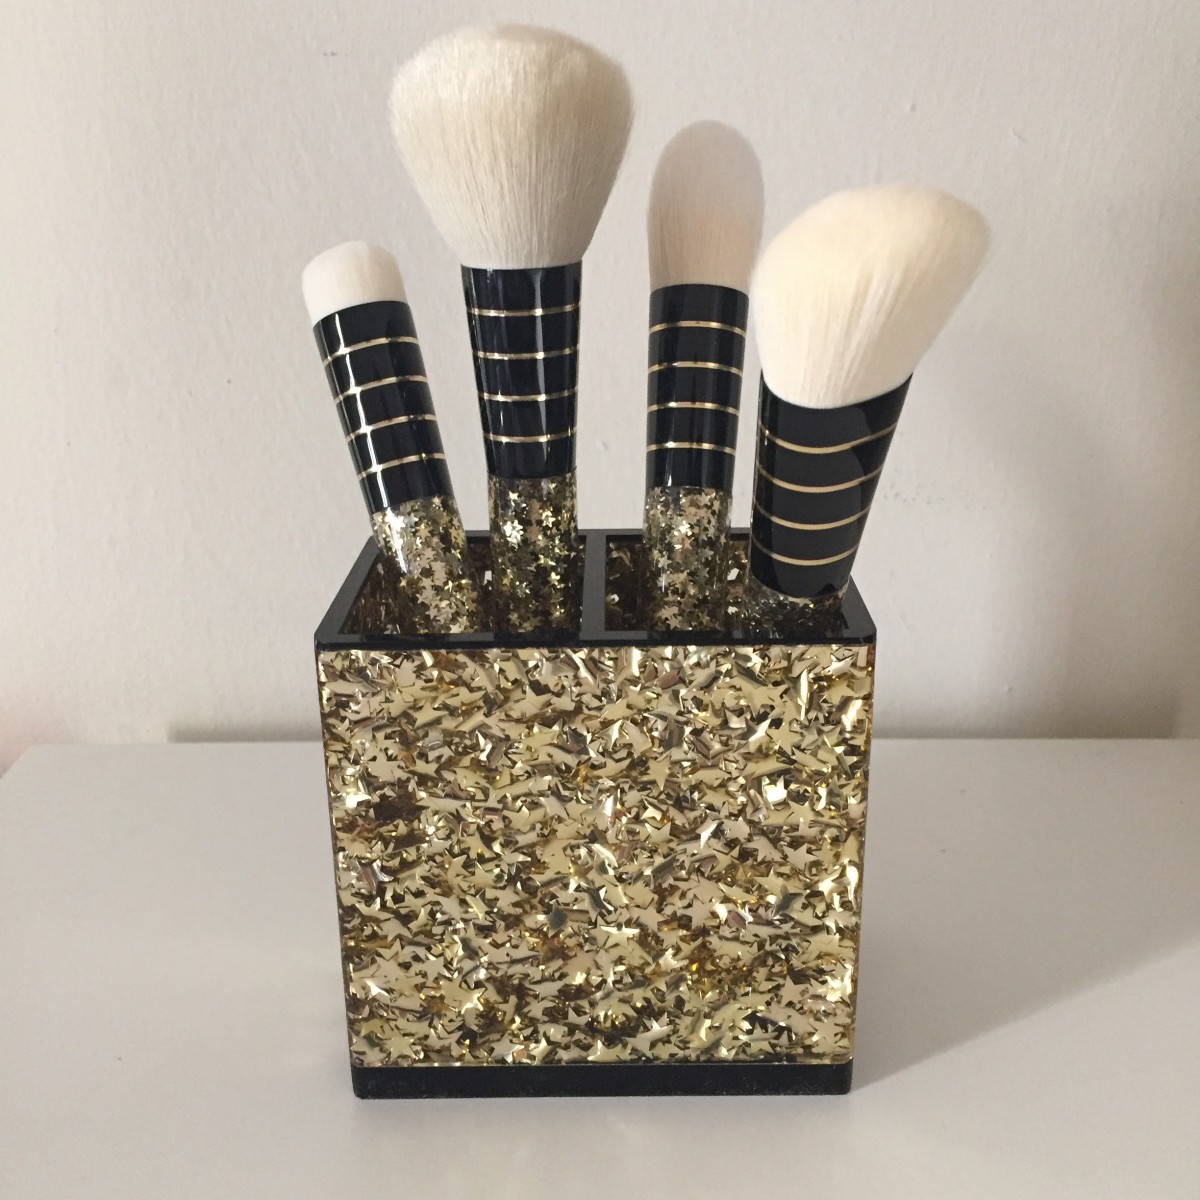 Three Glittery Makeup Brush Sets You Need Now